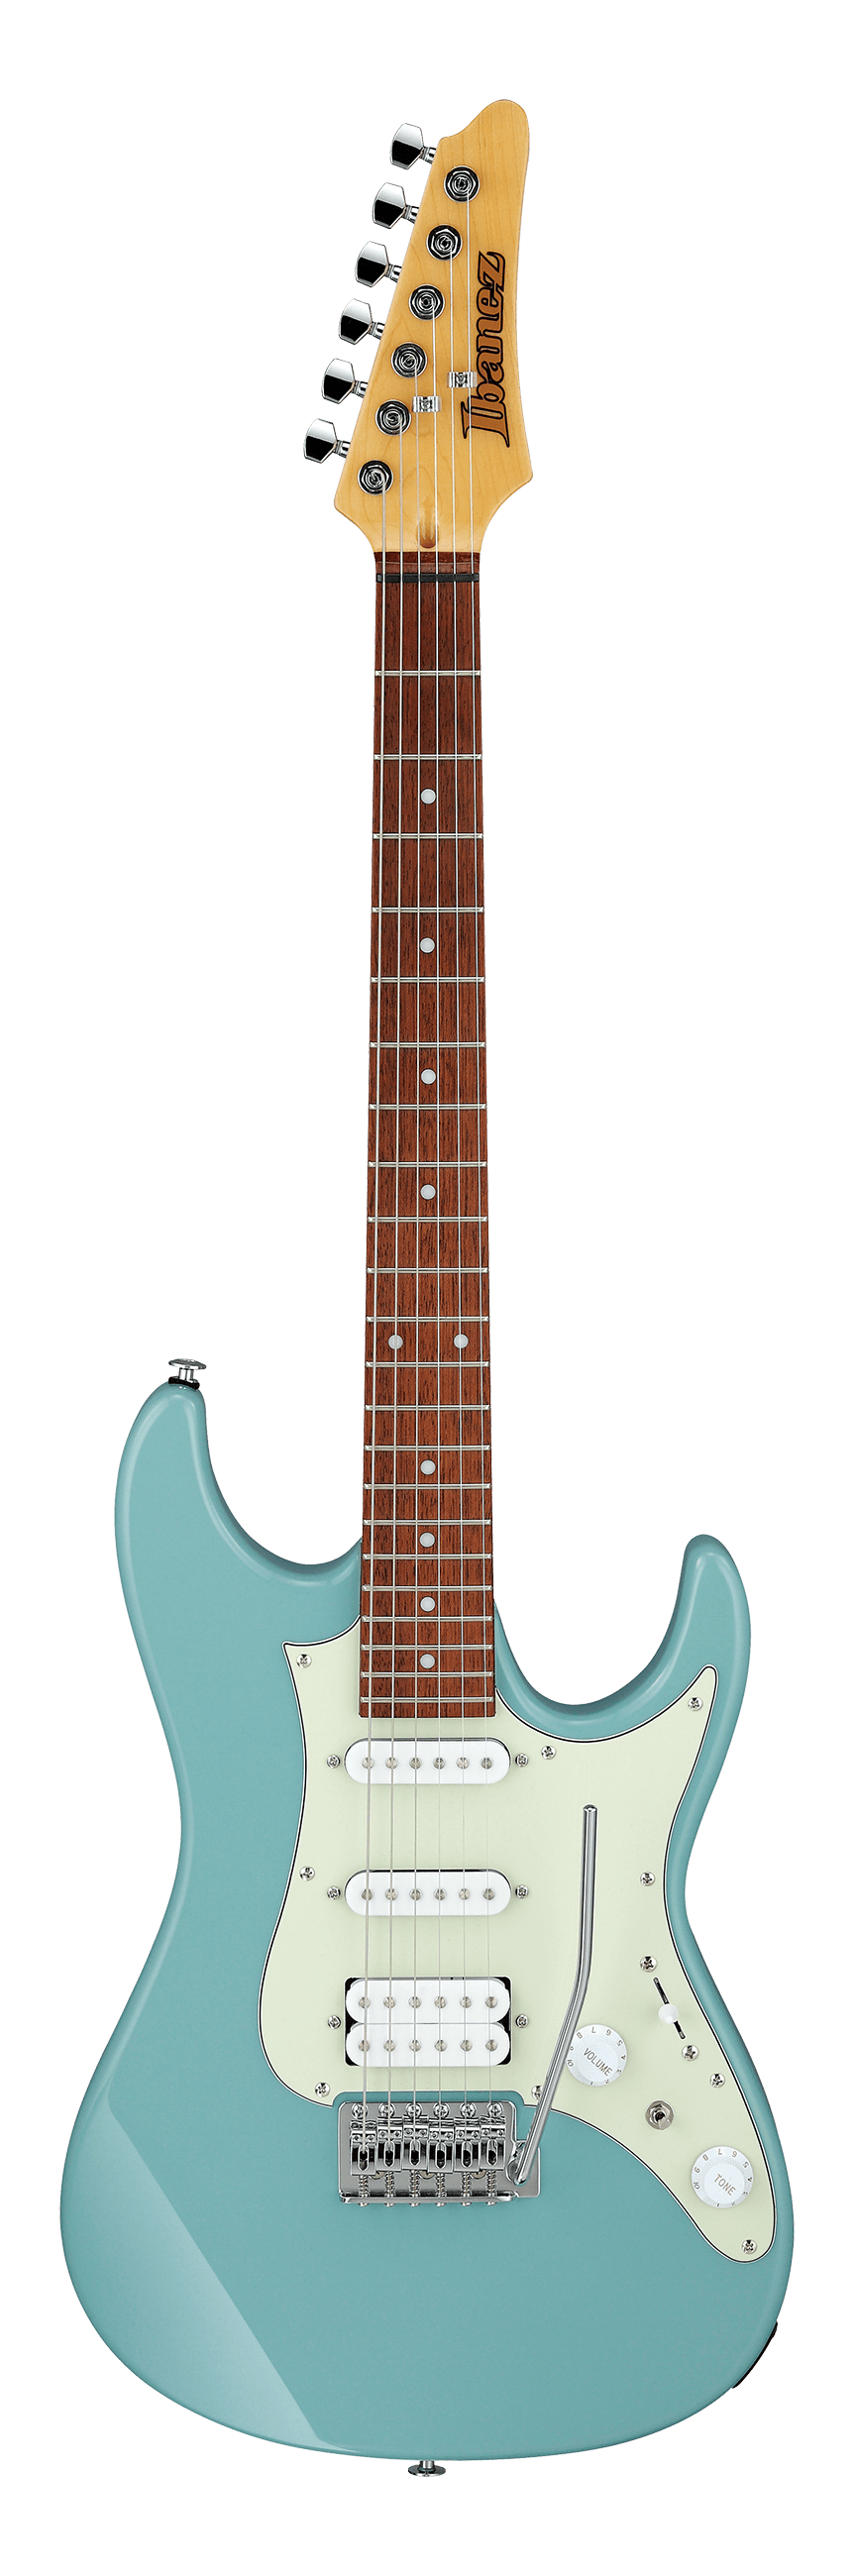 Ibanez AZES40 Electric Guitar - Purist Blue, IBANEZ, ELECTRIC GUITAR, ibanez-electric-guitar-azes40-prb, ZOSO MUSIC SDN BHD